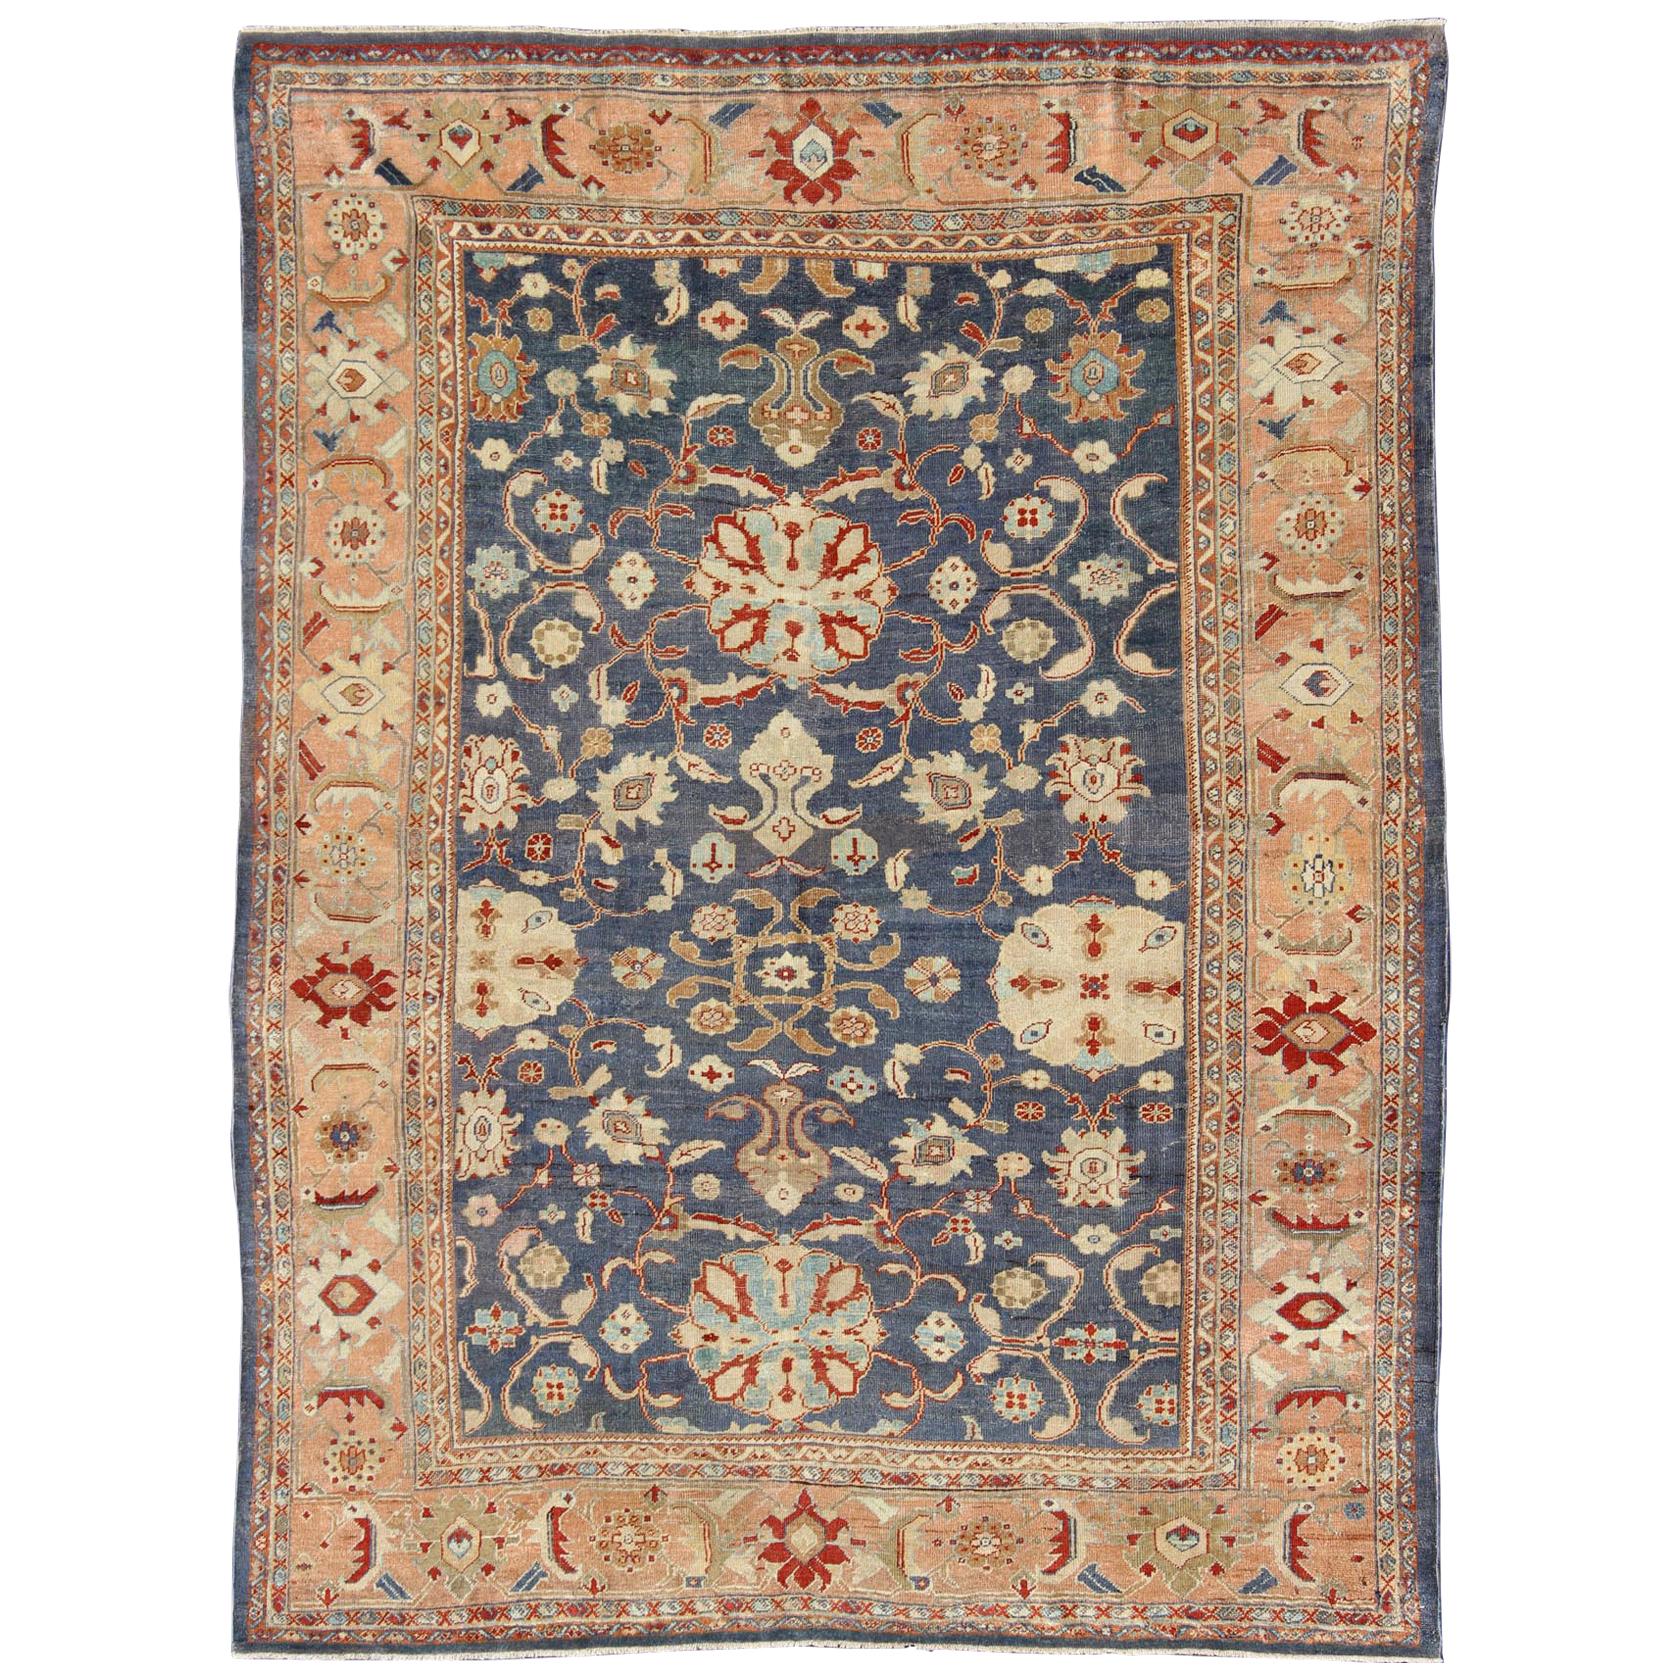 Antique Sultanabad Ziegler Persian Rug with Purple Blue Background & Soft Coral 